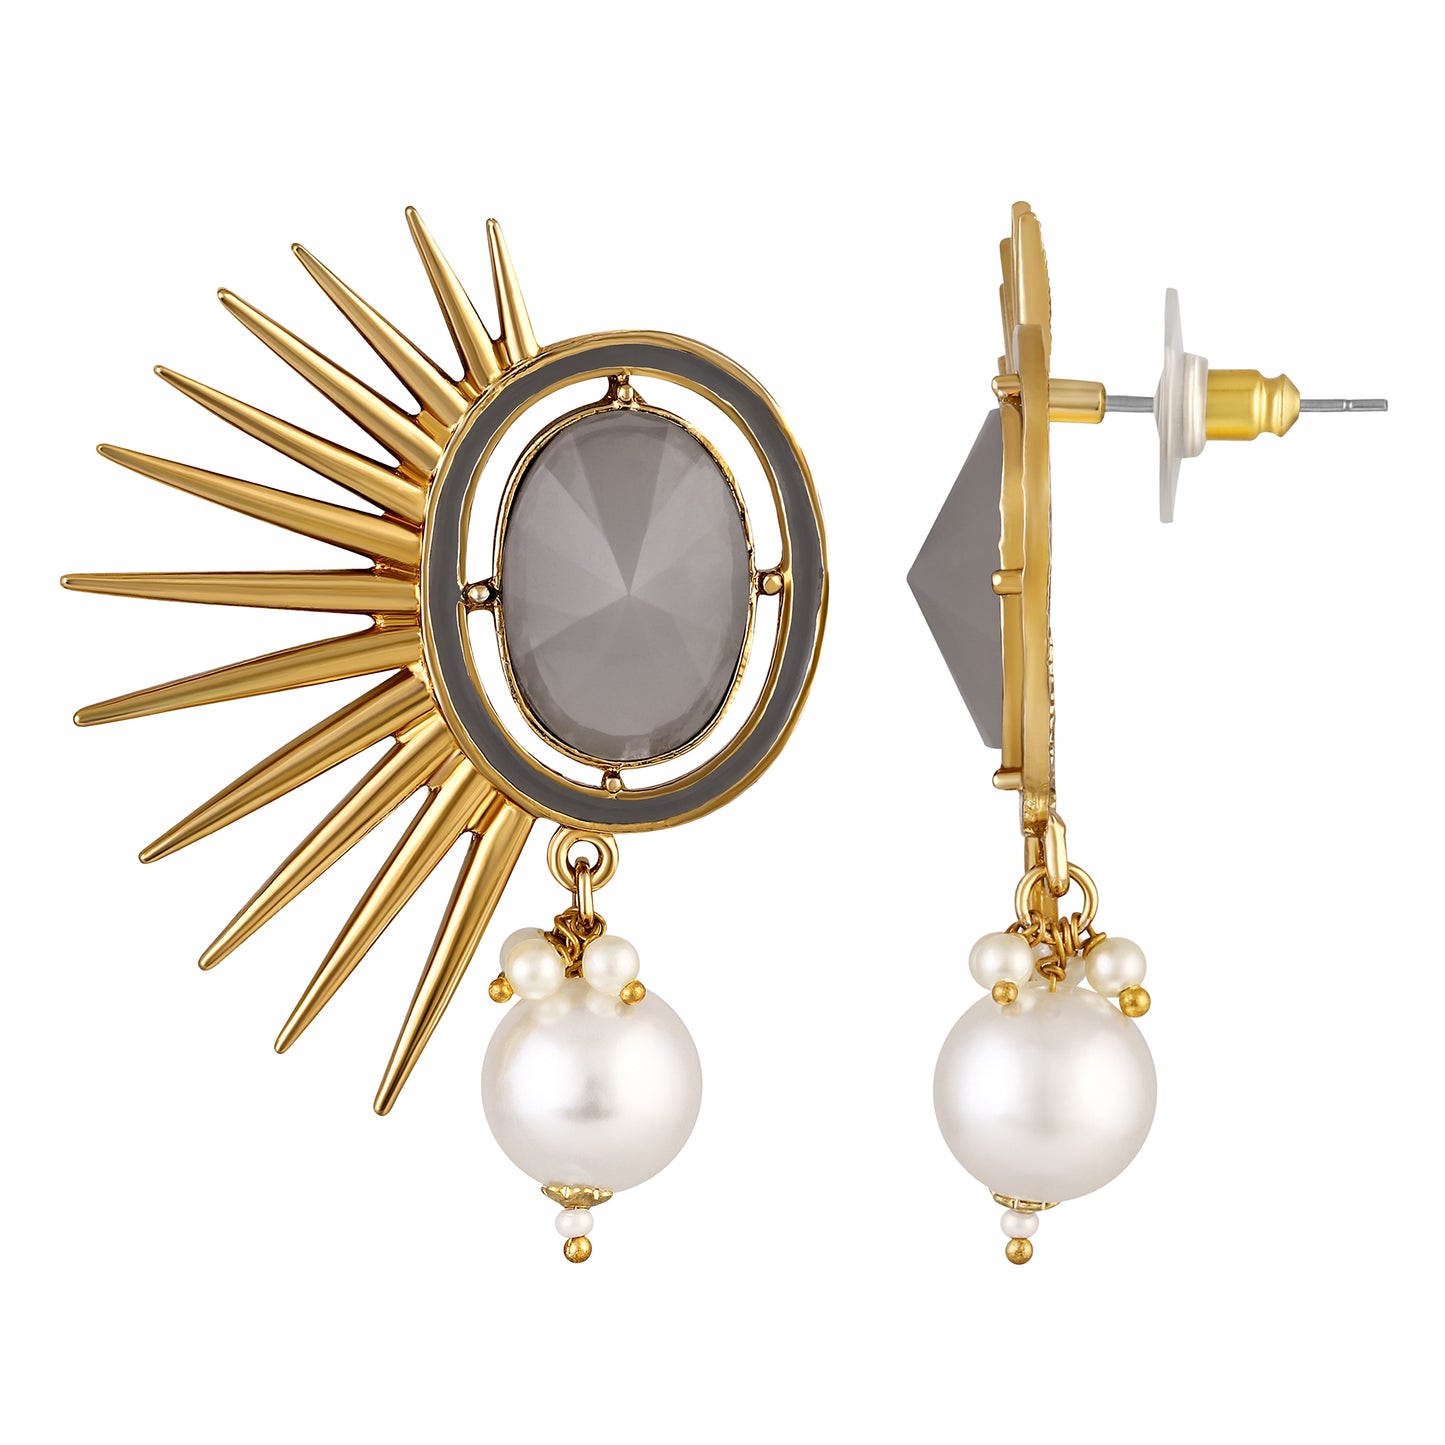 Bdiva 18K Gold Plated Grey Quarts Earrings With A Pearl Drop.